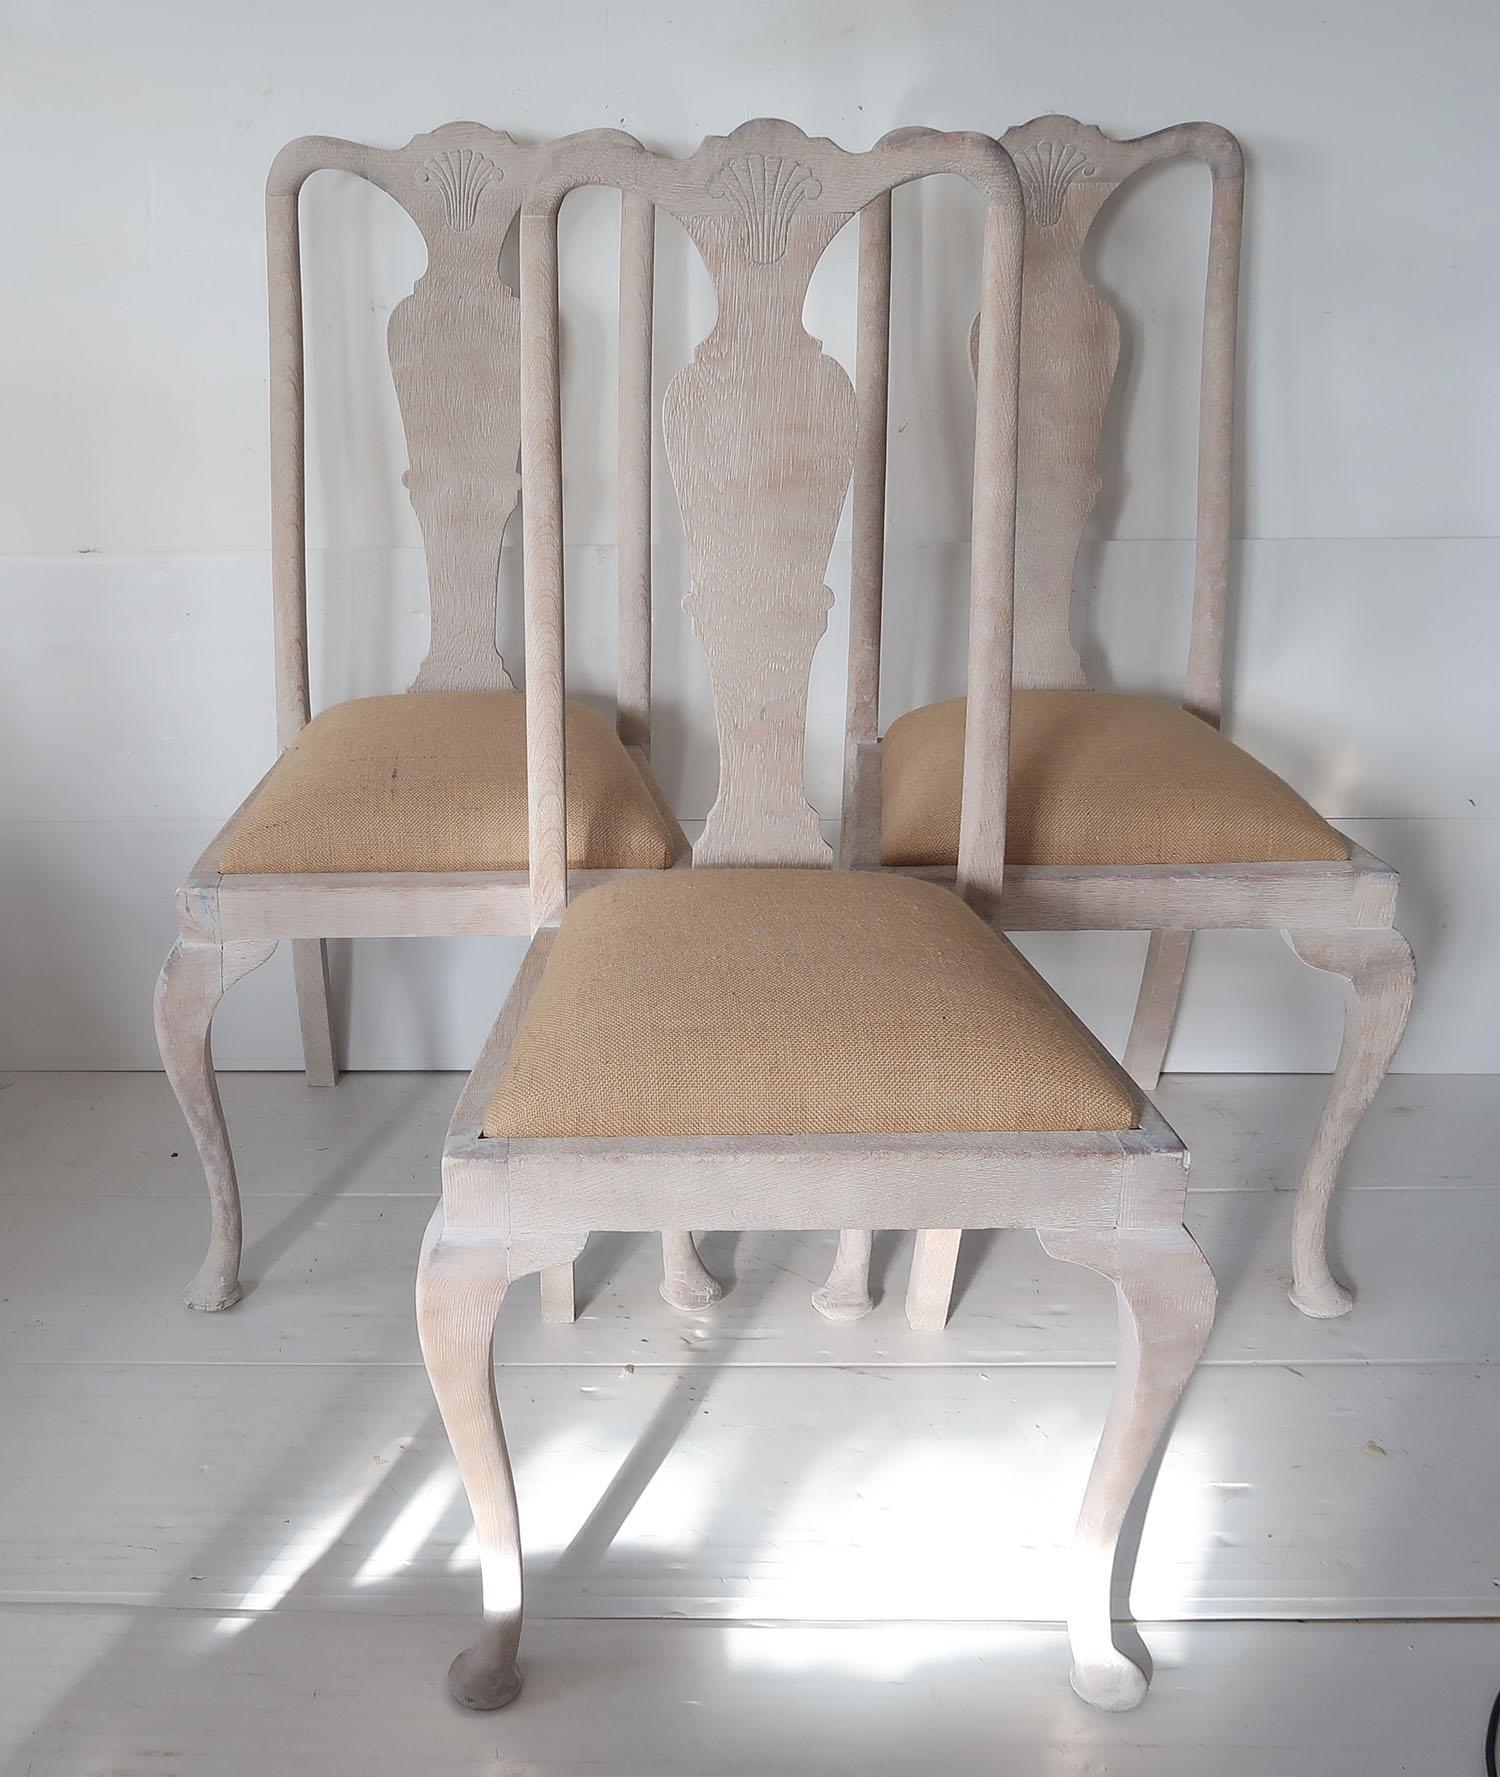 A super matching set of 6 dining chairs

Typical of the Gustavian chair they have the lovely urn shaped splat, the unadorned cabriole leg and the top rail with the shell detail

They have been recently limed to enhance the beautiful grain in the